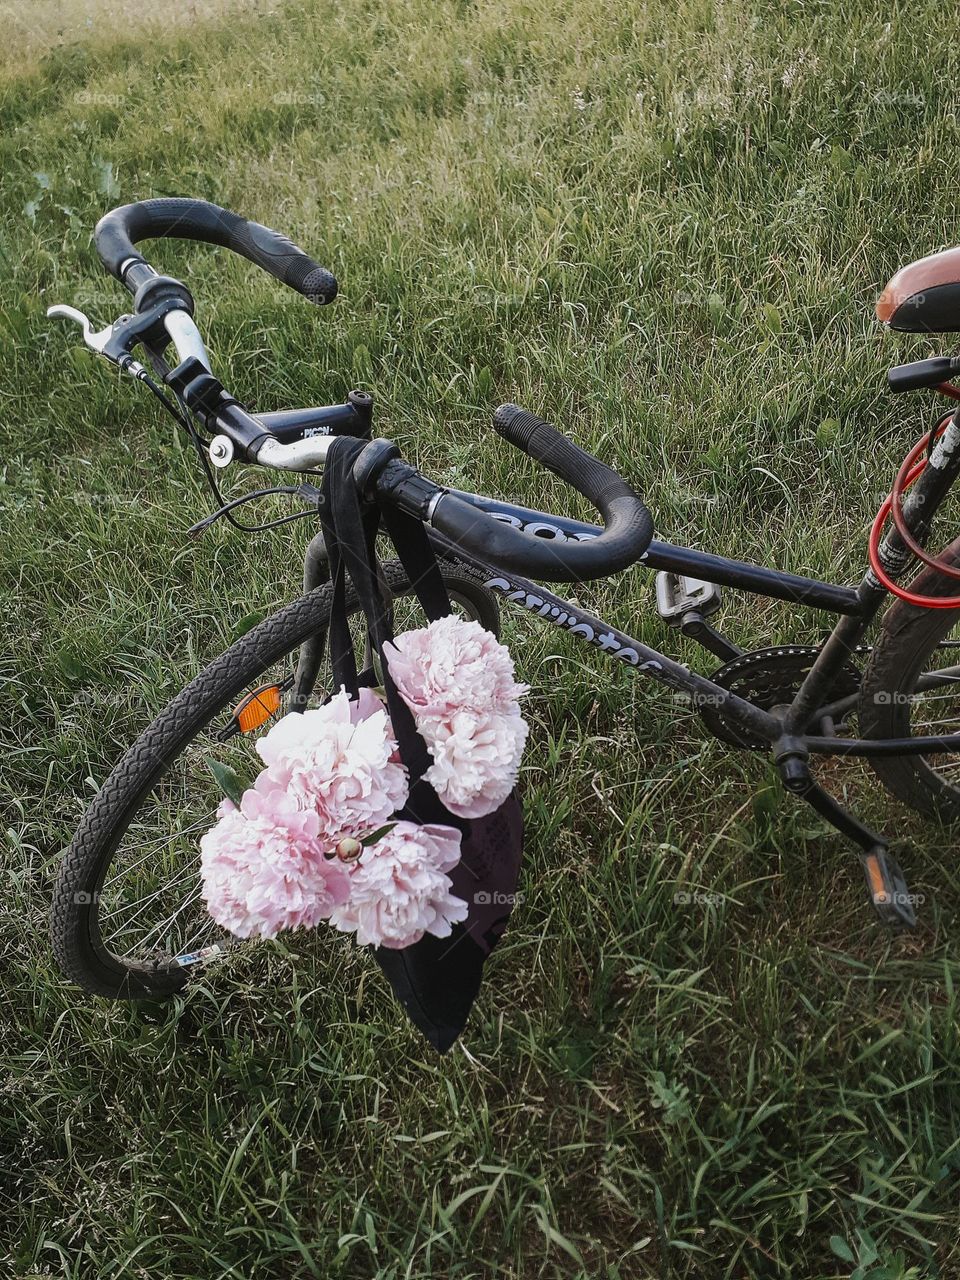 a sports bike with a bag with pink peonies that evokes the emotion of unexpectedness